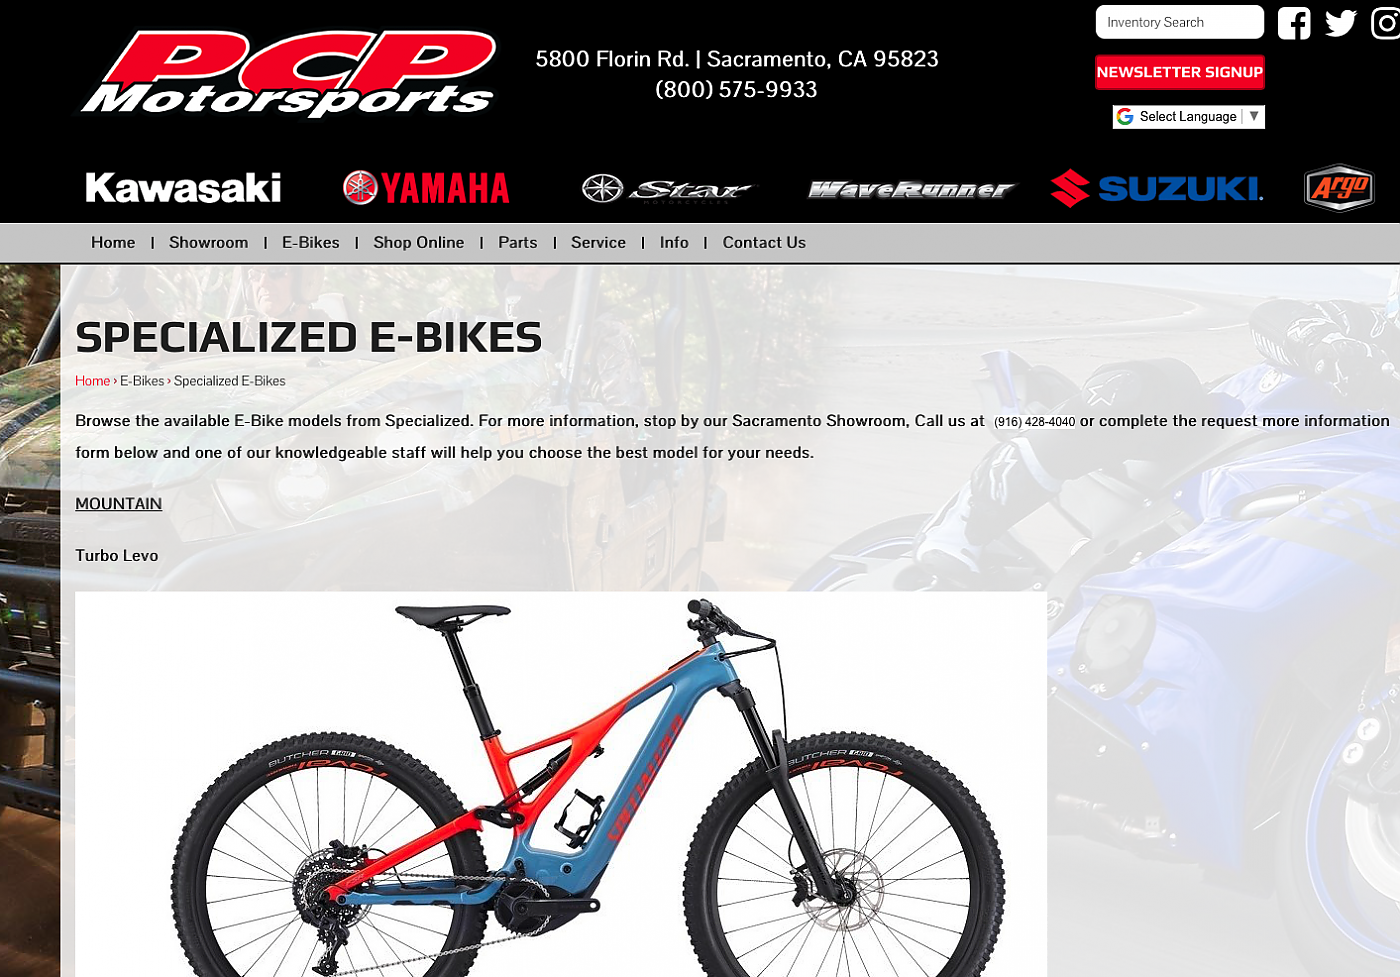 E-bike brands look to powersport dealers to reach dirt bike enthusiasts — and more Bicycle Retailer and Industry News